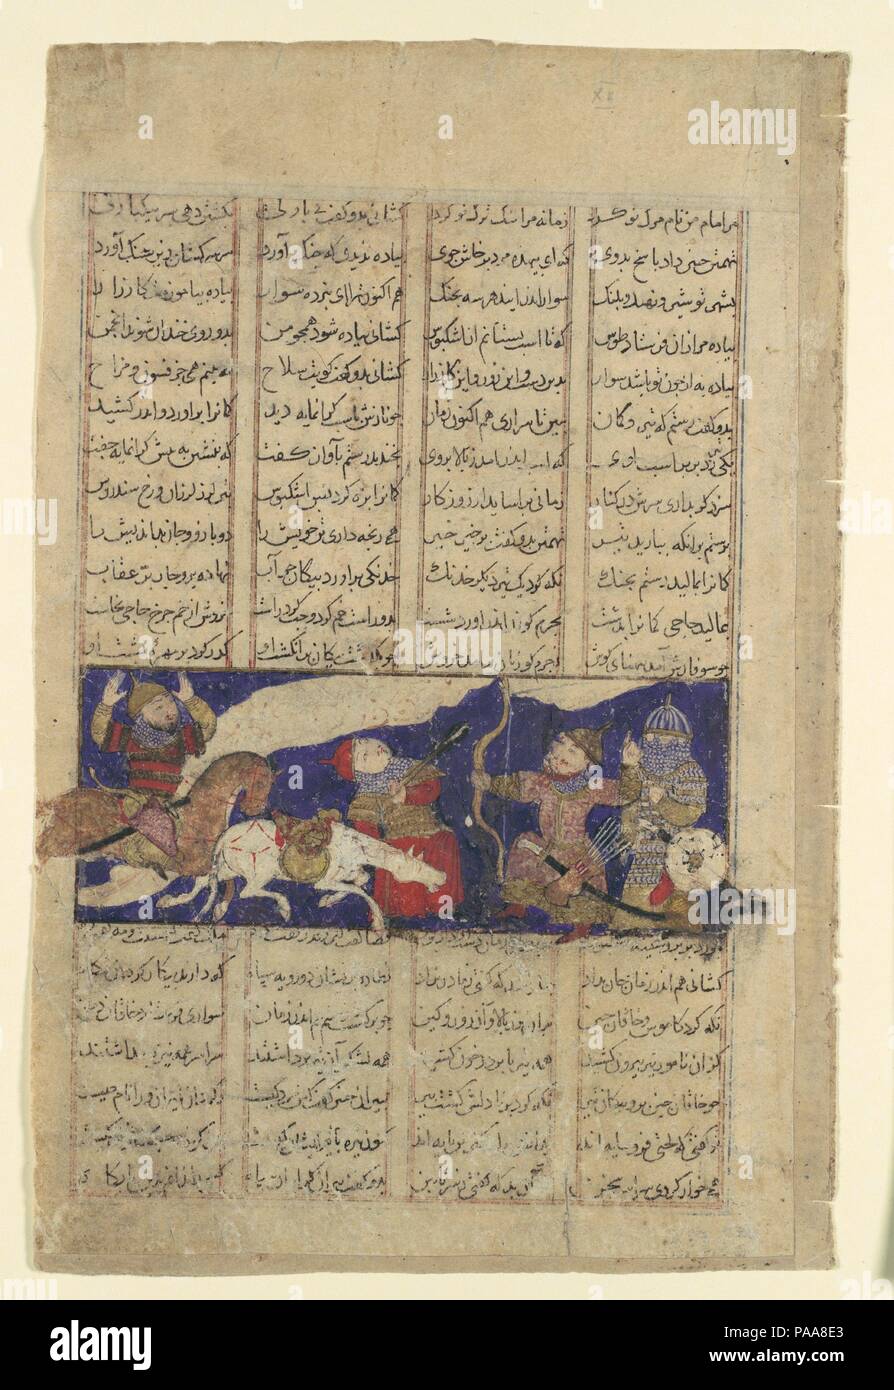 'The Combat of Rustam and Ashkabus', Folio from a Shahnama (Book of Kings). Author: Abu'l Qasim Firdausi (935-1020). Dimensions: Page: 8 x 5 3/16 in. (20.3 x 13.2 cm)  Painting: 1 11/16 x 4 3/16 in. (4.3 x 10.7 cm). Date: ca. 1330-40.  The arrogant enemy-hero Ashkabus scorns Rustam for facing him on foot, so Rustam ensures that Ashkabus will also be on foot by shooting his horse out from under him.  The white cloud suggests the dust of battle. The warrior behind Rustam wears an aventail to protect his face and holds a shield of cane with a radiating pattern, both of which appear, similarly dra Stock Photo